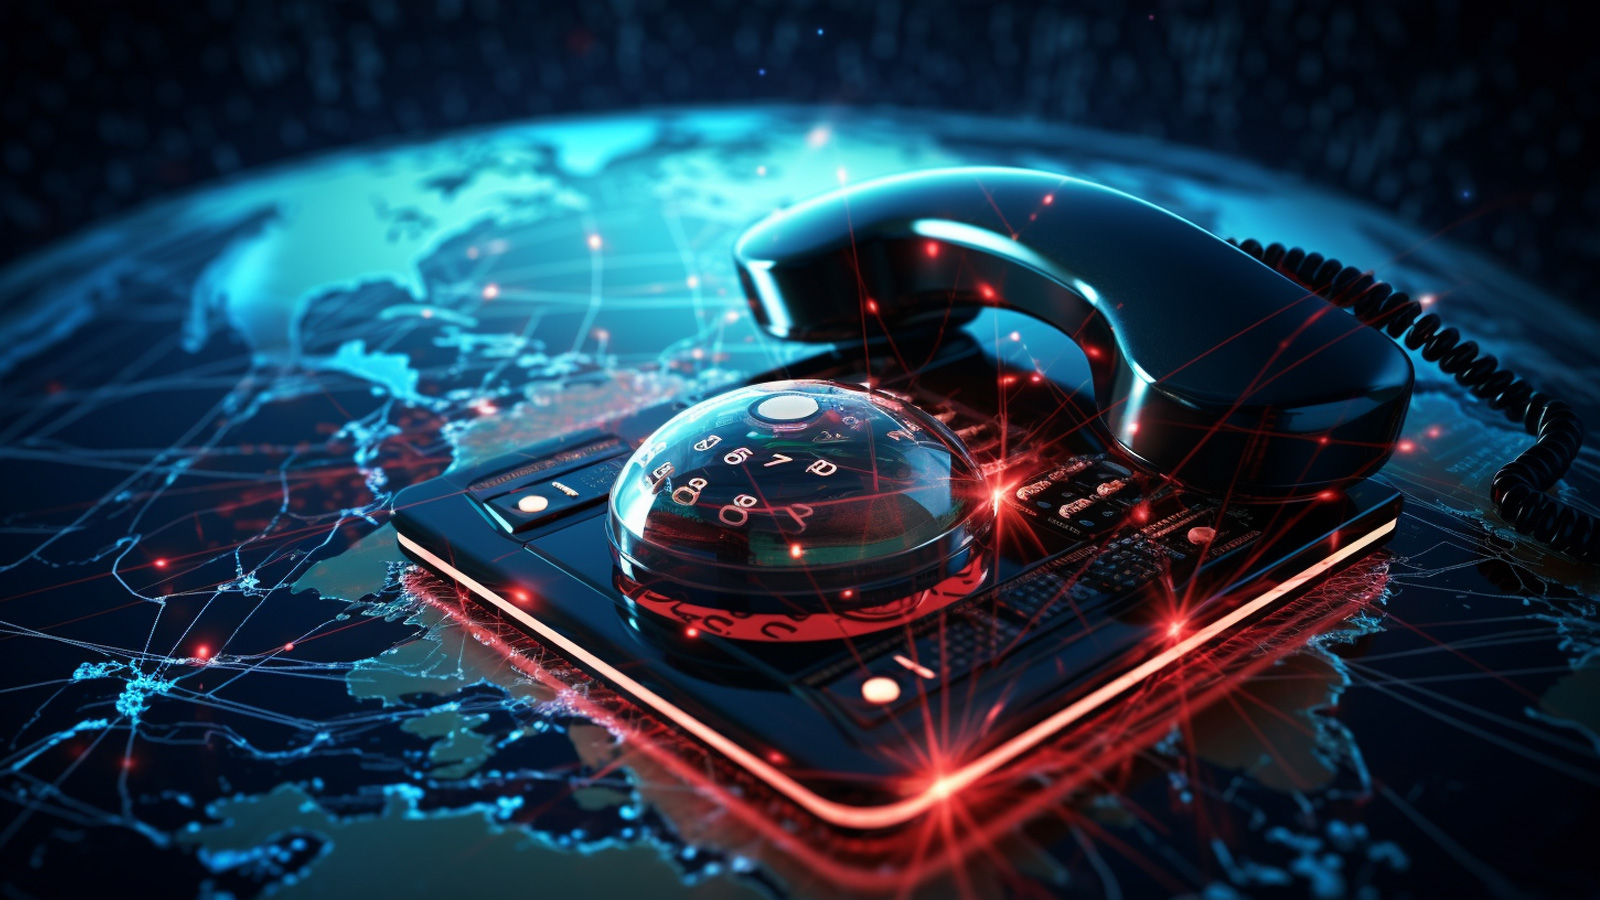 New malware named HTTPSnoop and PipeSnoop are used in cyberattacks on telecommunication service providers in the Middle East, allowing threat actors t